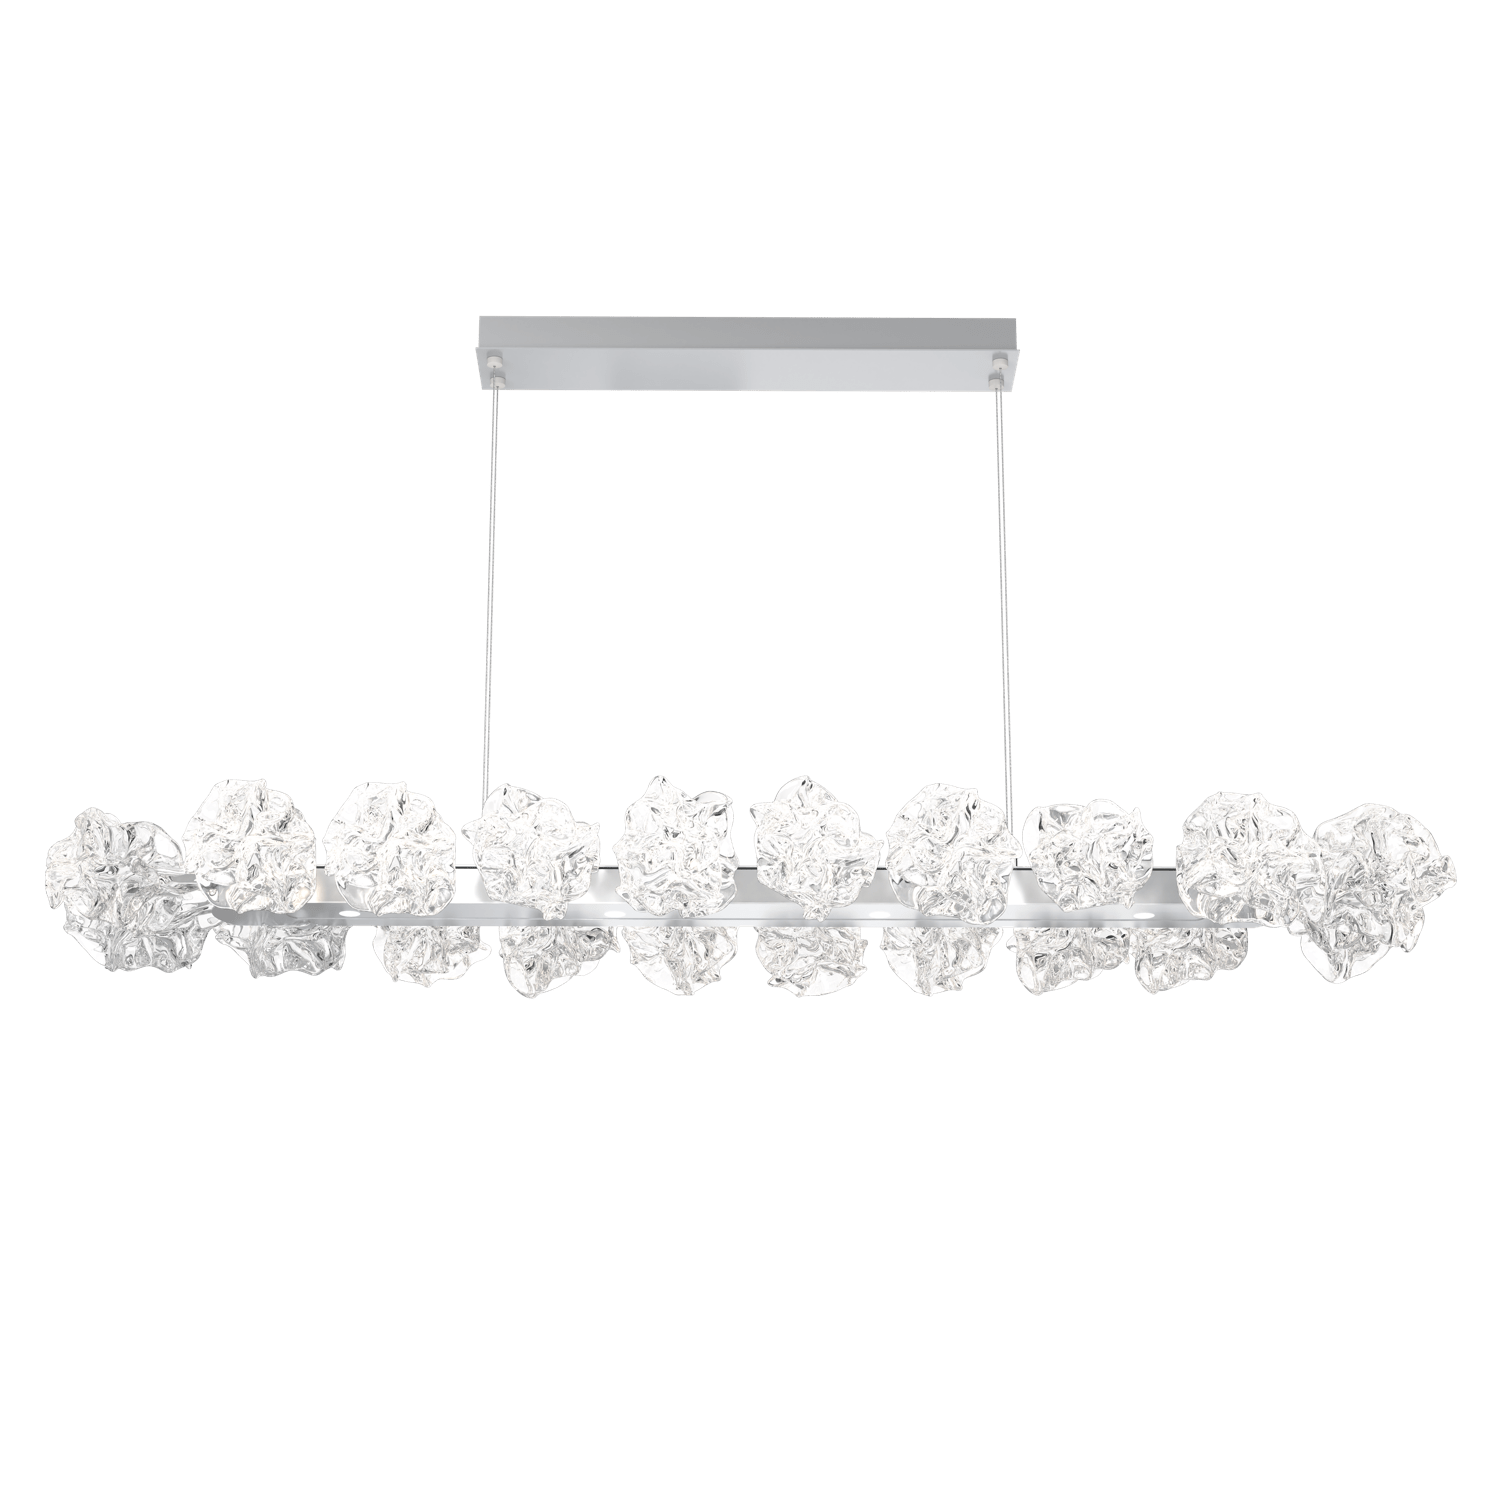 PLB0059-60-CS-Hammerton-Studio-Blossom-60-inch-linear-chandelier-with-classic-silver-finish-and-clear-handblown-crystal-glass-shades-and-LED-lamping